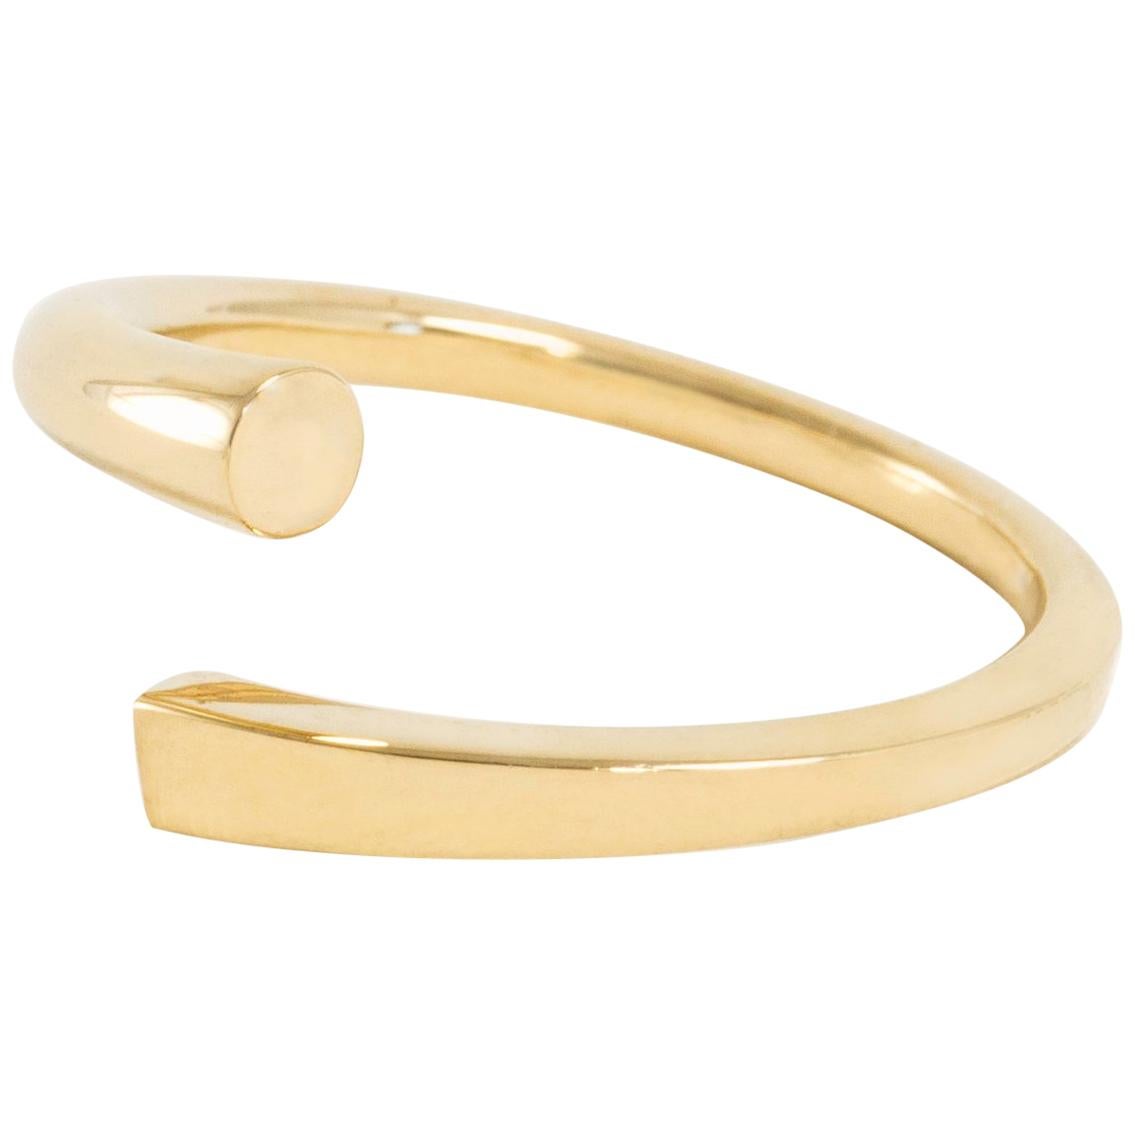 Solid Gold Flow Ring from Square to Circle